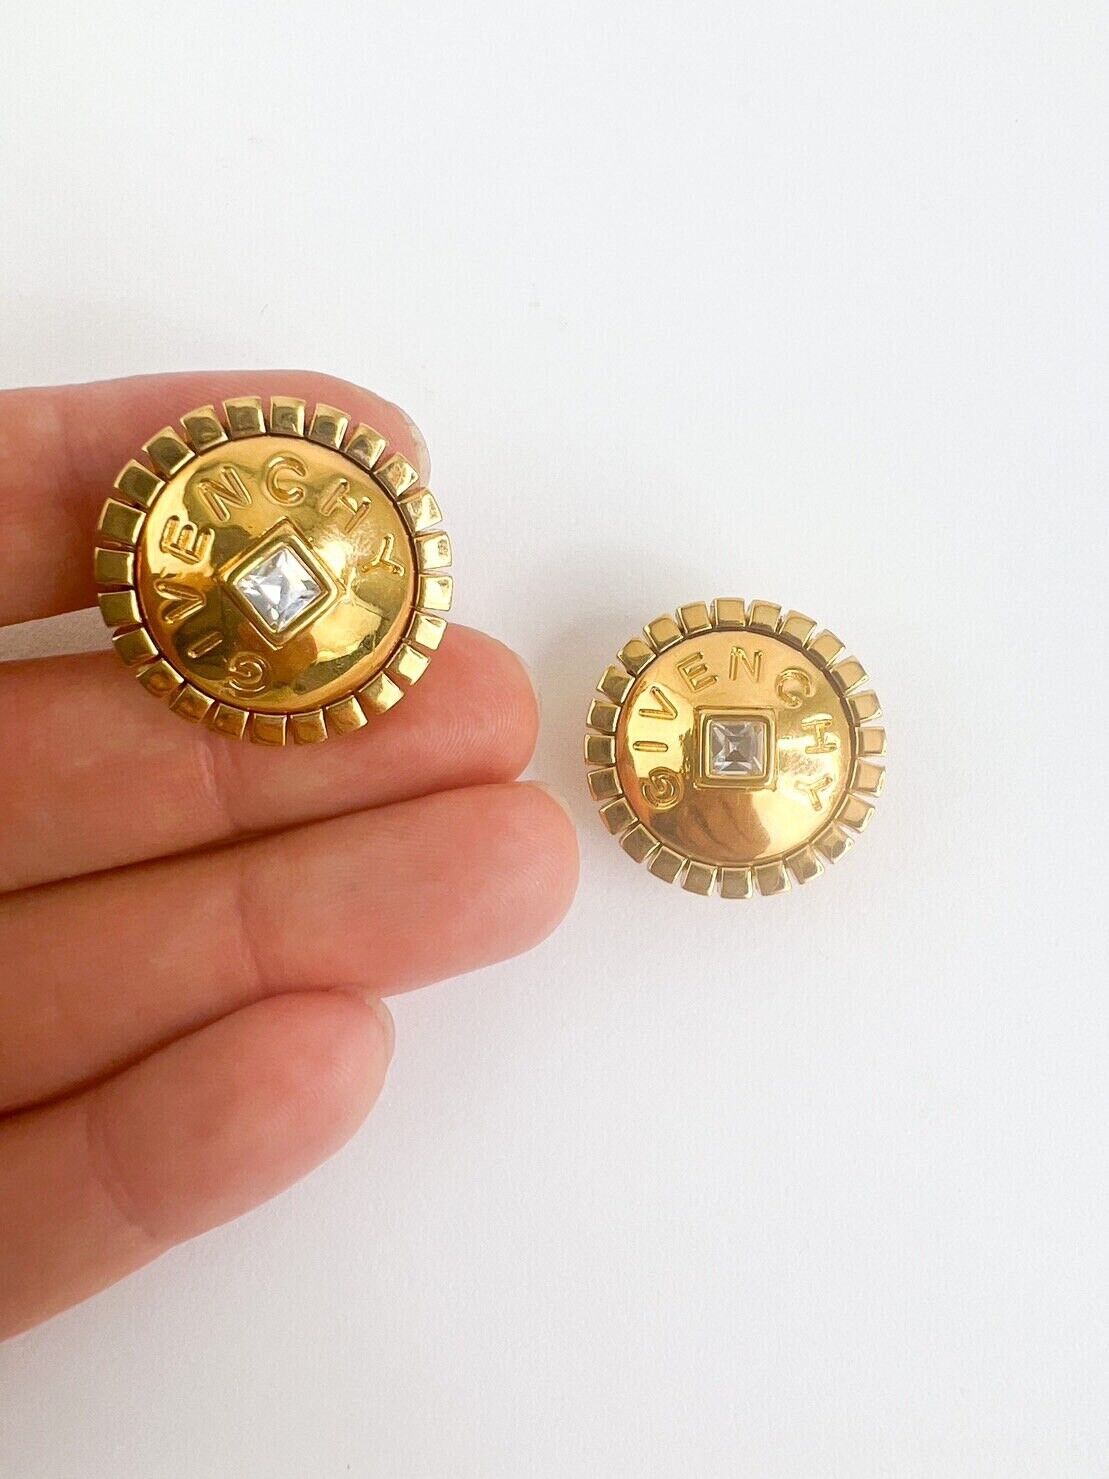 Givenchy Earrings, Vintage Earrings, Round Earrings, Coin Earrings, Bridal Jewelry, Gold round medal, Wedding Jewelry, Jewelry for Women